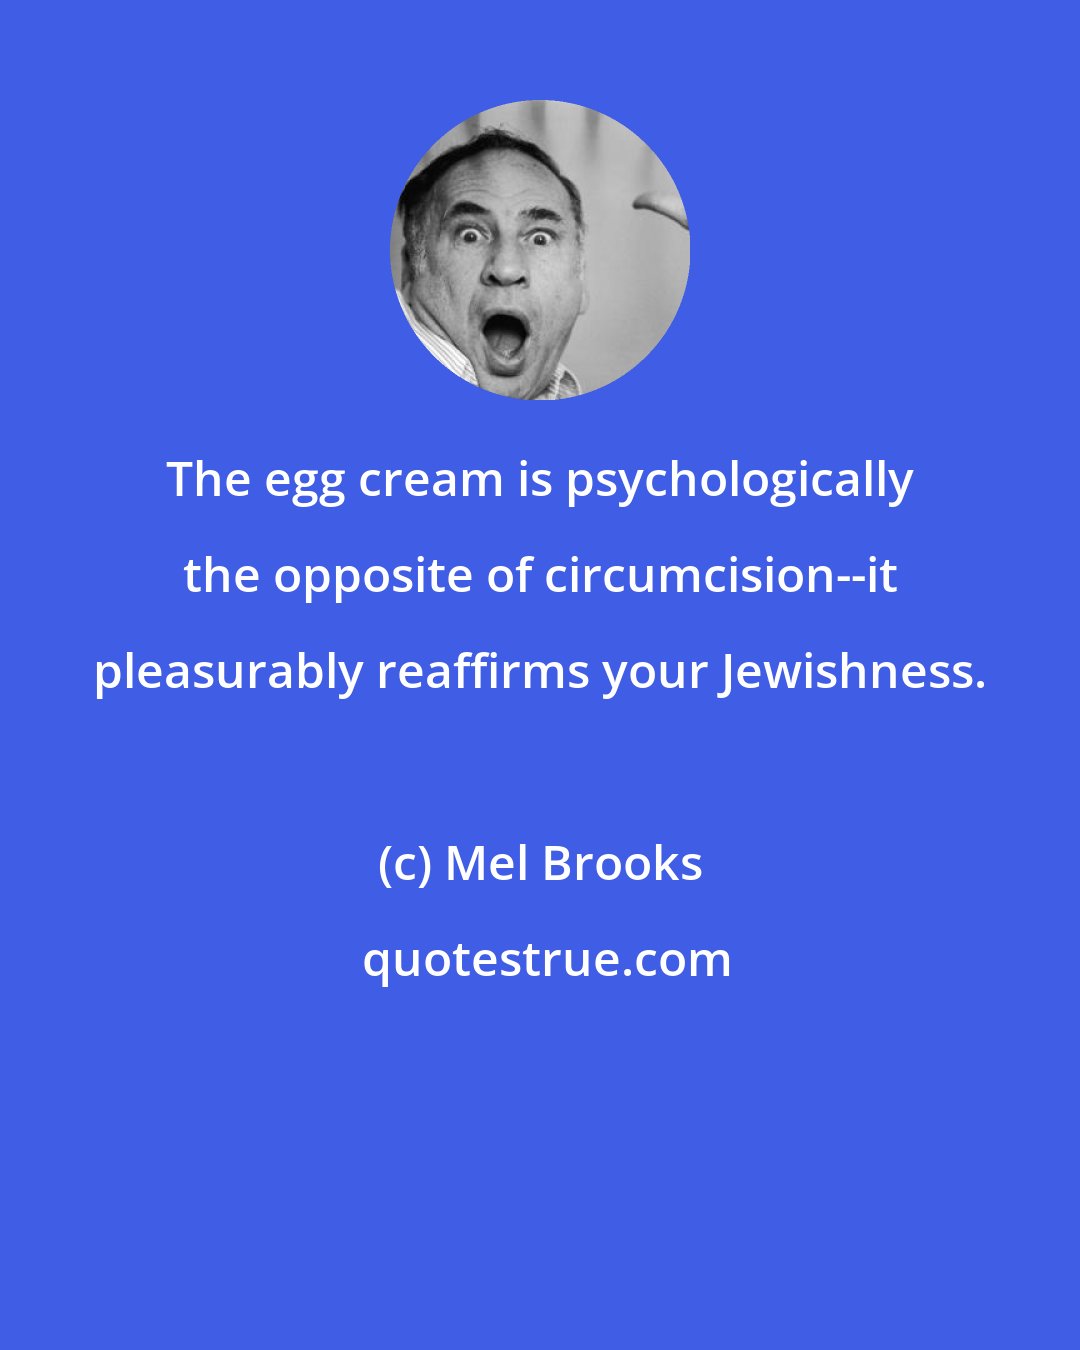 Mel Brooks: The egg cream is psychologically the opposite of circumcision--it pleasurably reaffirms your Jewishness.